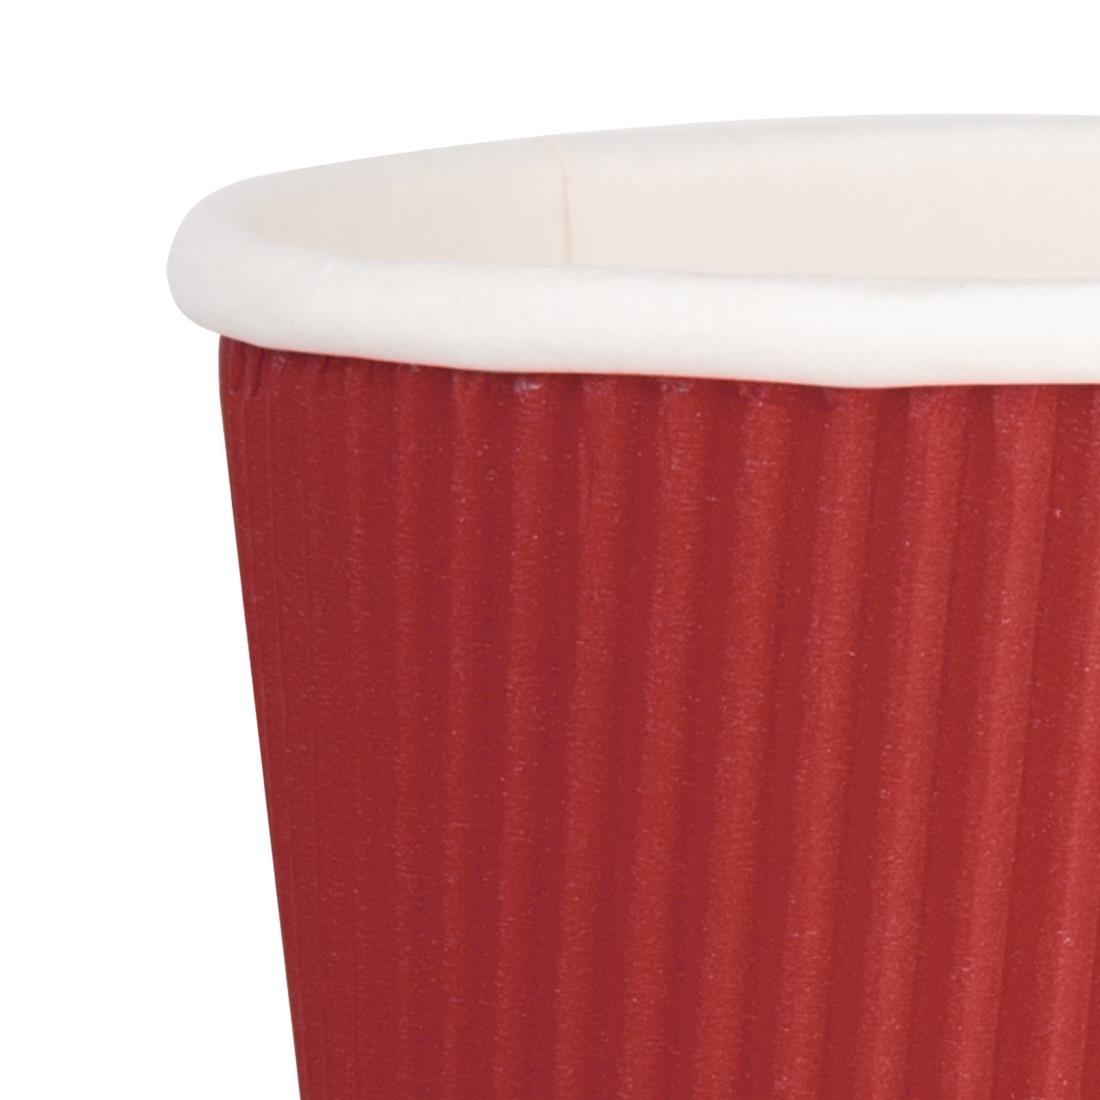 Fiesta Recyclable Coffee Cups Ripple Wall Red 225ml / 8oz (Pack of 500) - GP427  - 5